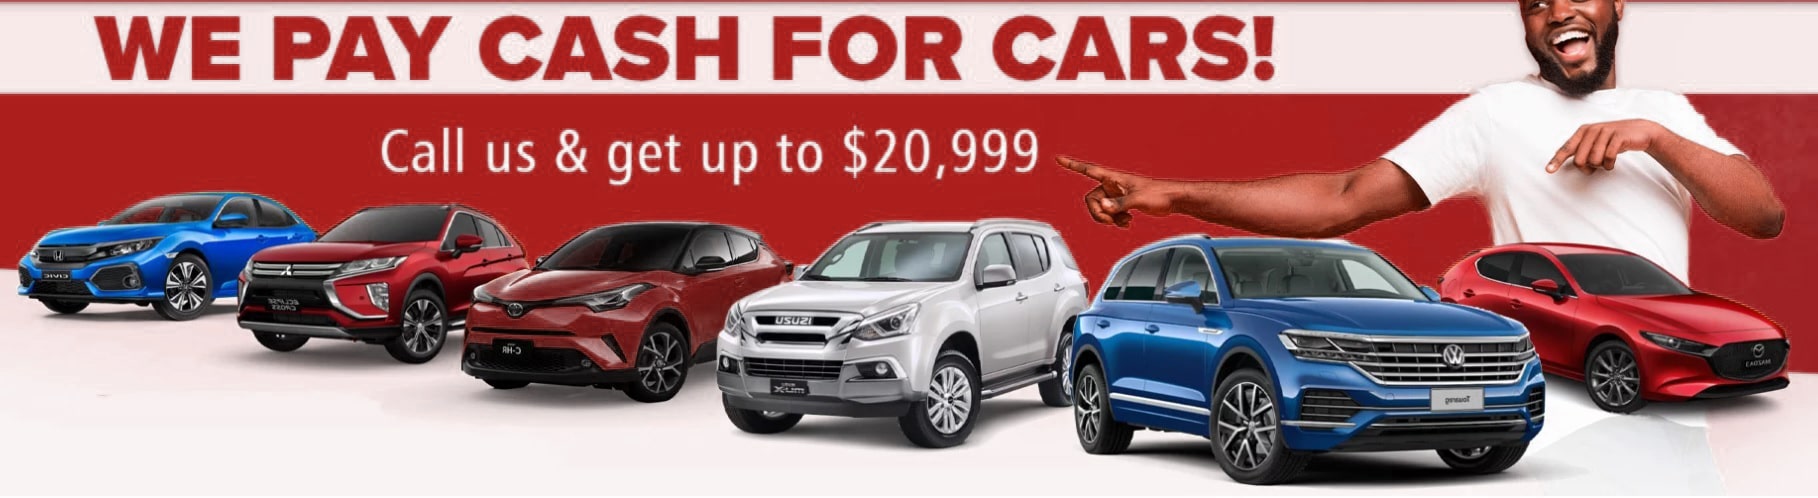 Cash for Cars Blairgowrie